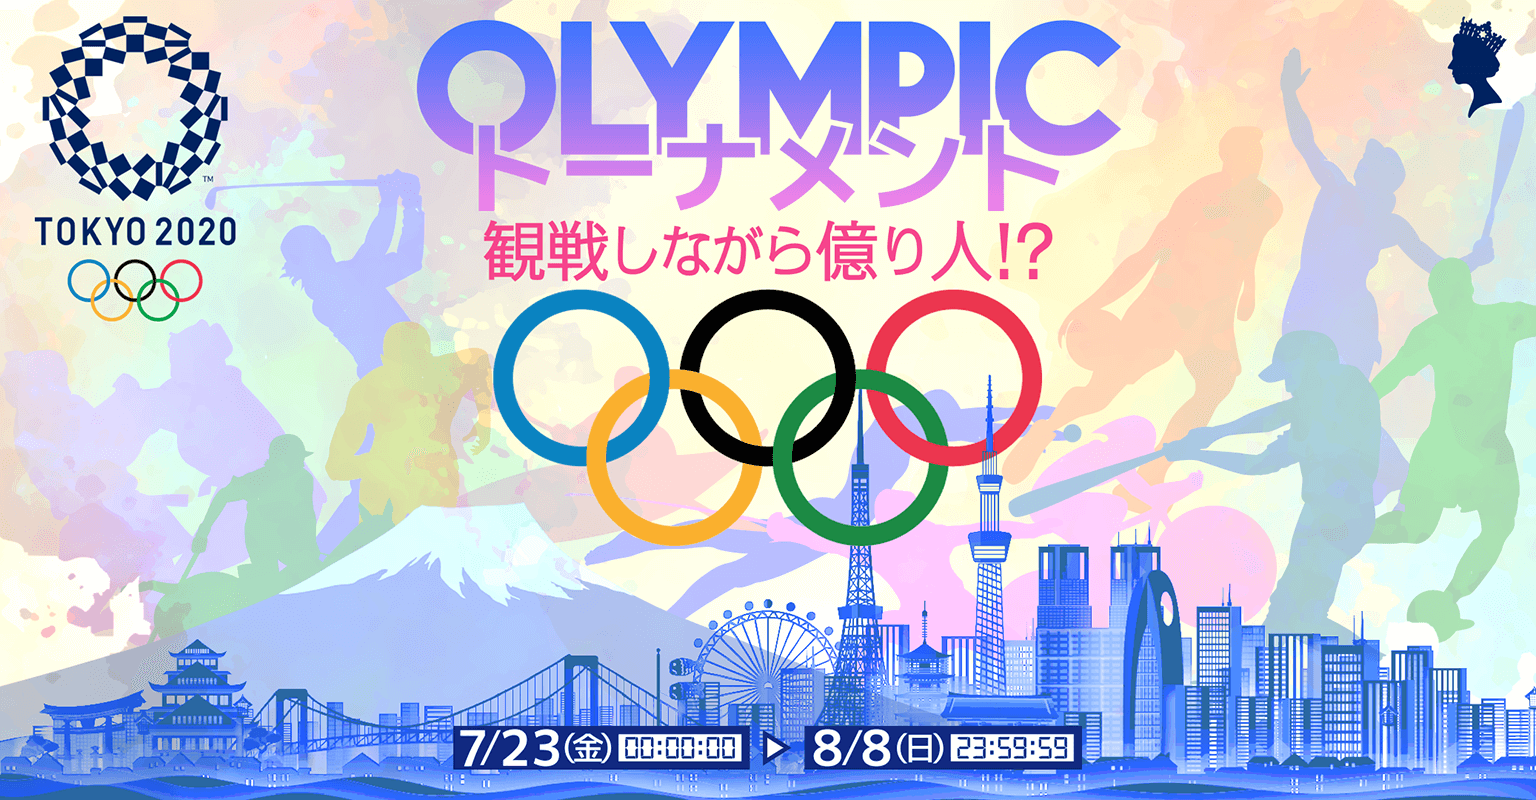 Tokyo Olympics 2020 is a prestigious event, and billions of people watch it worldwide. This is the best time to make sports betting while watching the Olympics.